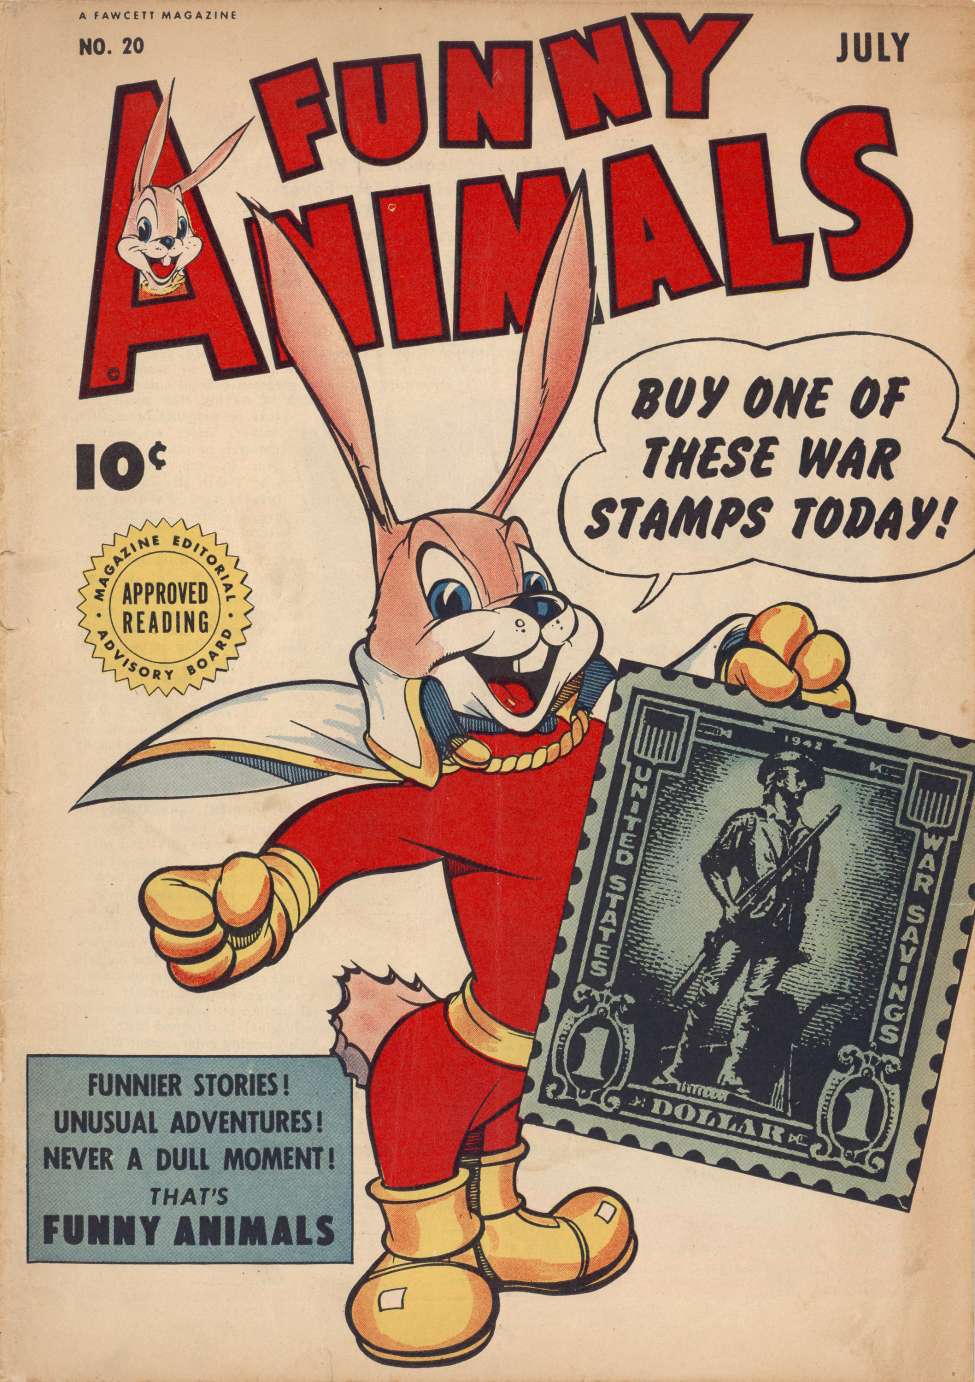 Book Cover For Fawcett's Funny Animals 20 - Version 2